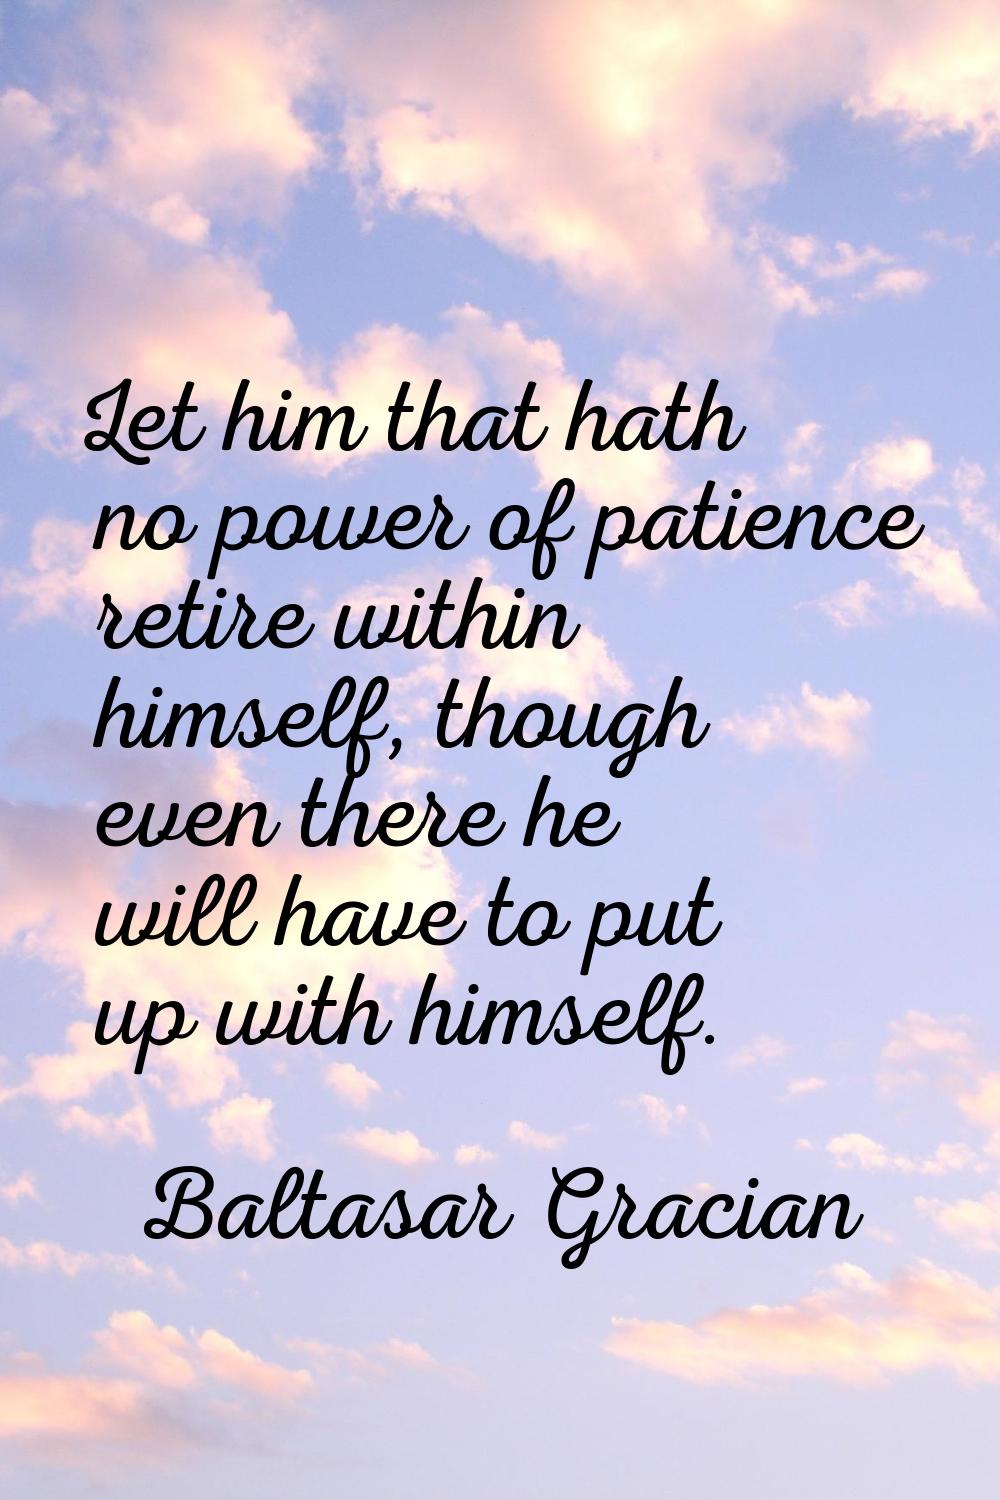 Let him that hath no power of patience retire within himself, though even there he will have to put